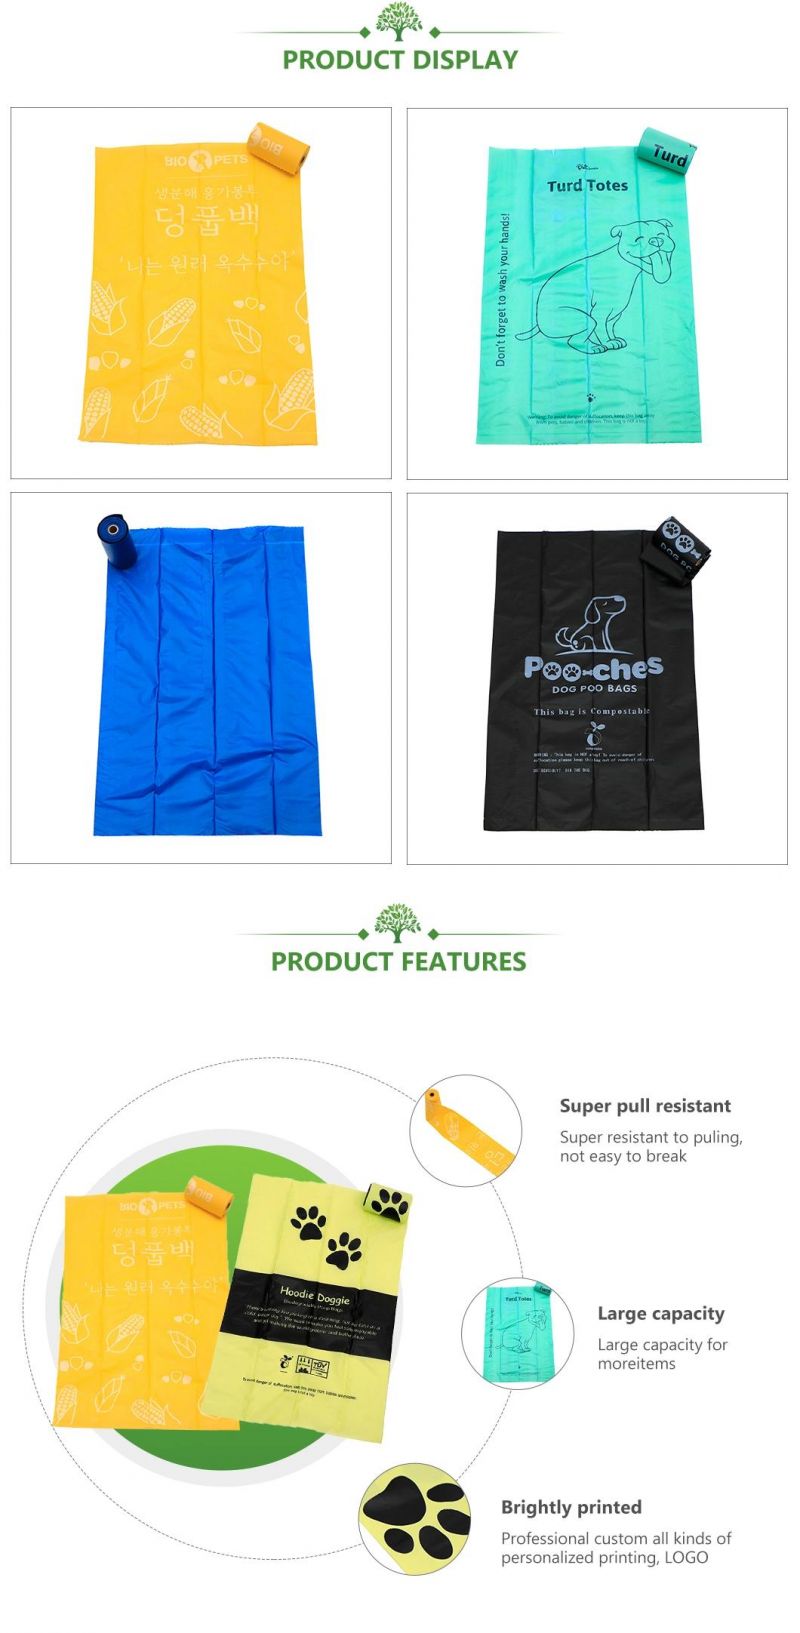 China PLA+Pbat/Pbat+Corn Starch Biodegradable Bags, Compostable Bags,Dog Pet Poop Bags,Waste Bags Factory with Ok Compost Home, Ok Compost Industrial,Seeding CE